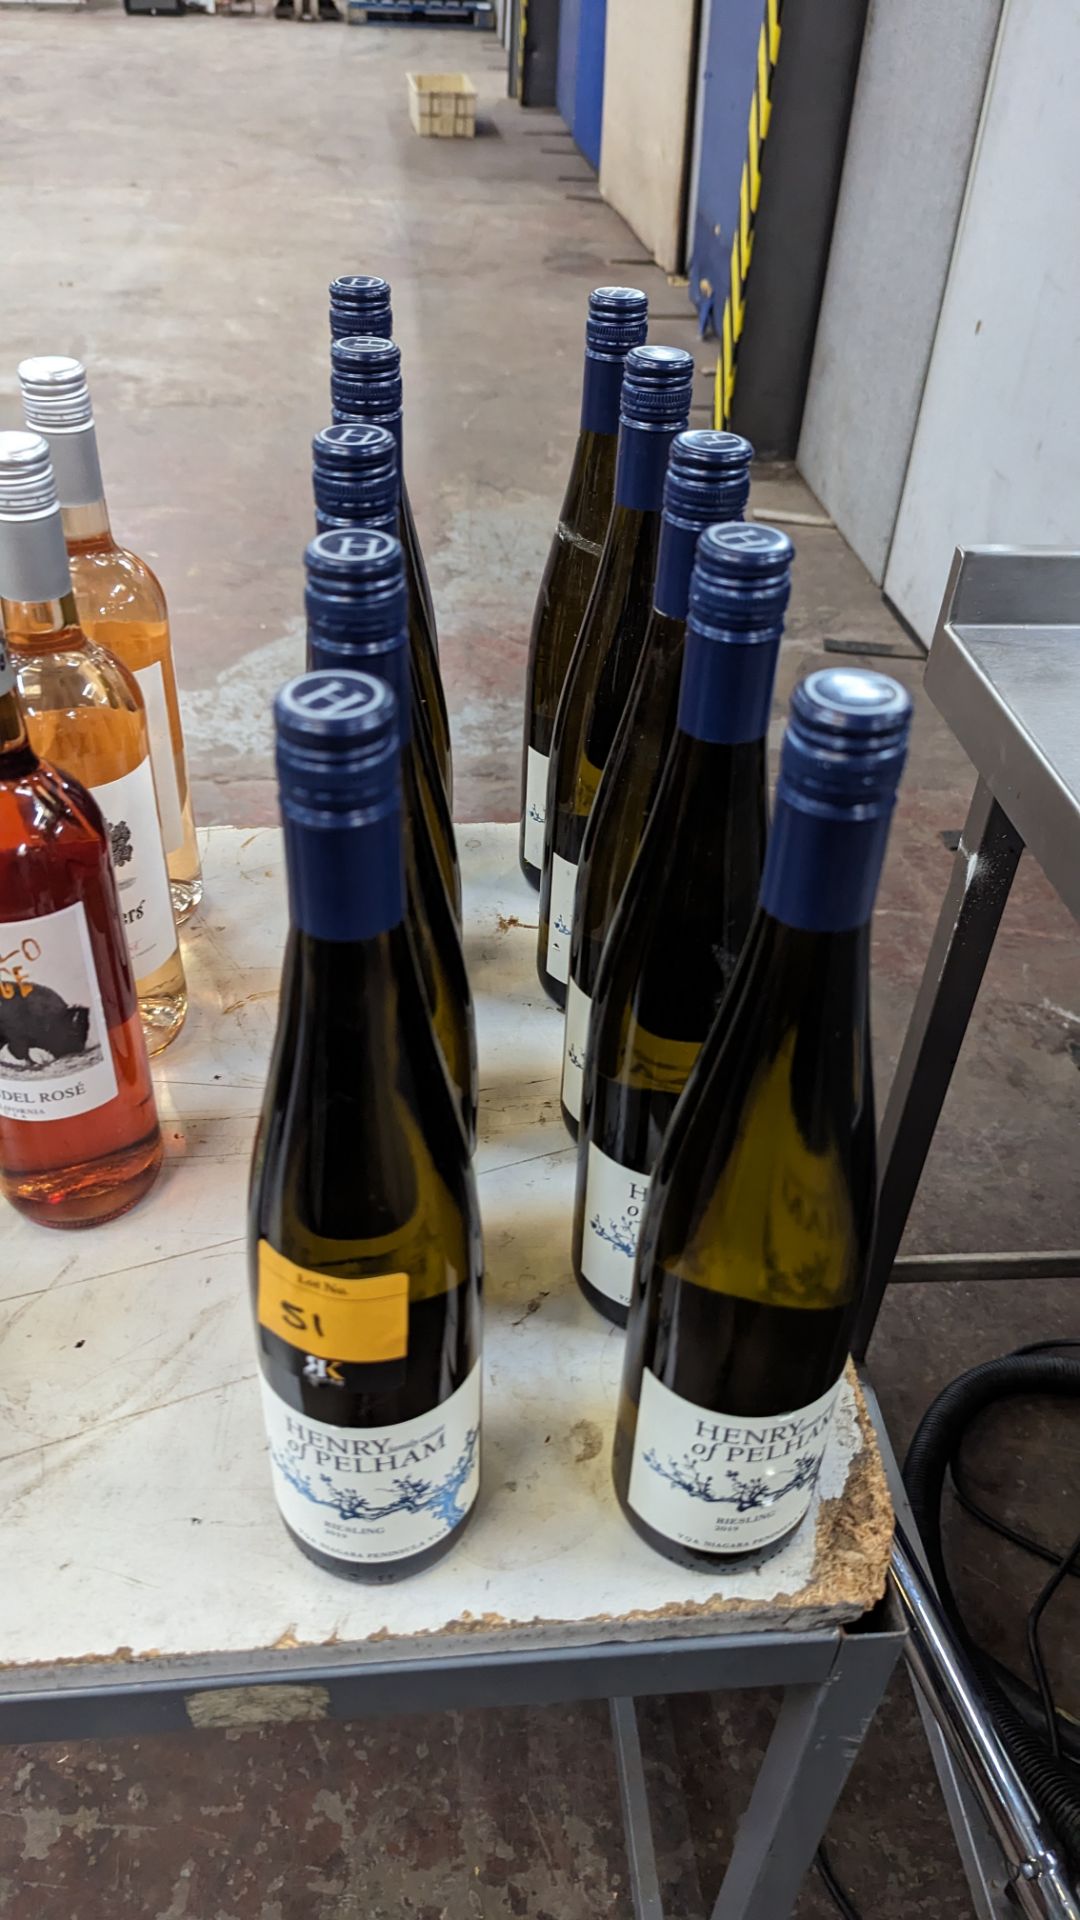 10 bottles of 2019 Henry of Pelham Riesling. Sold under AWRS number XQAW00000101017.